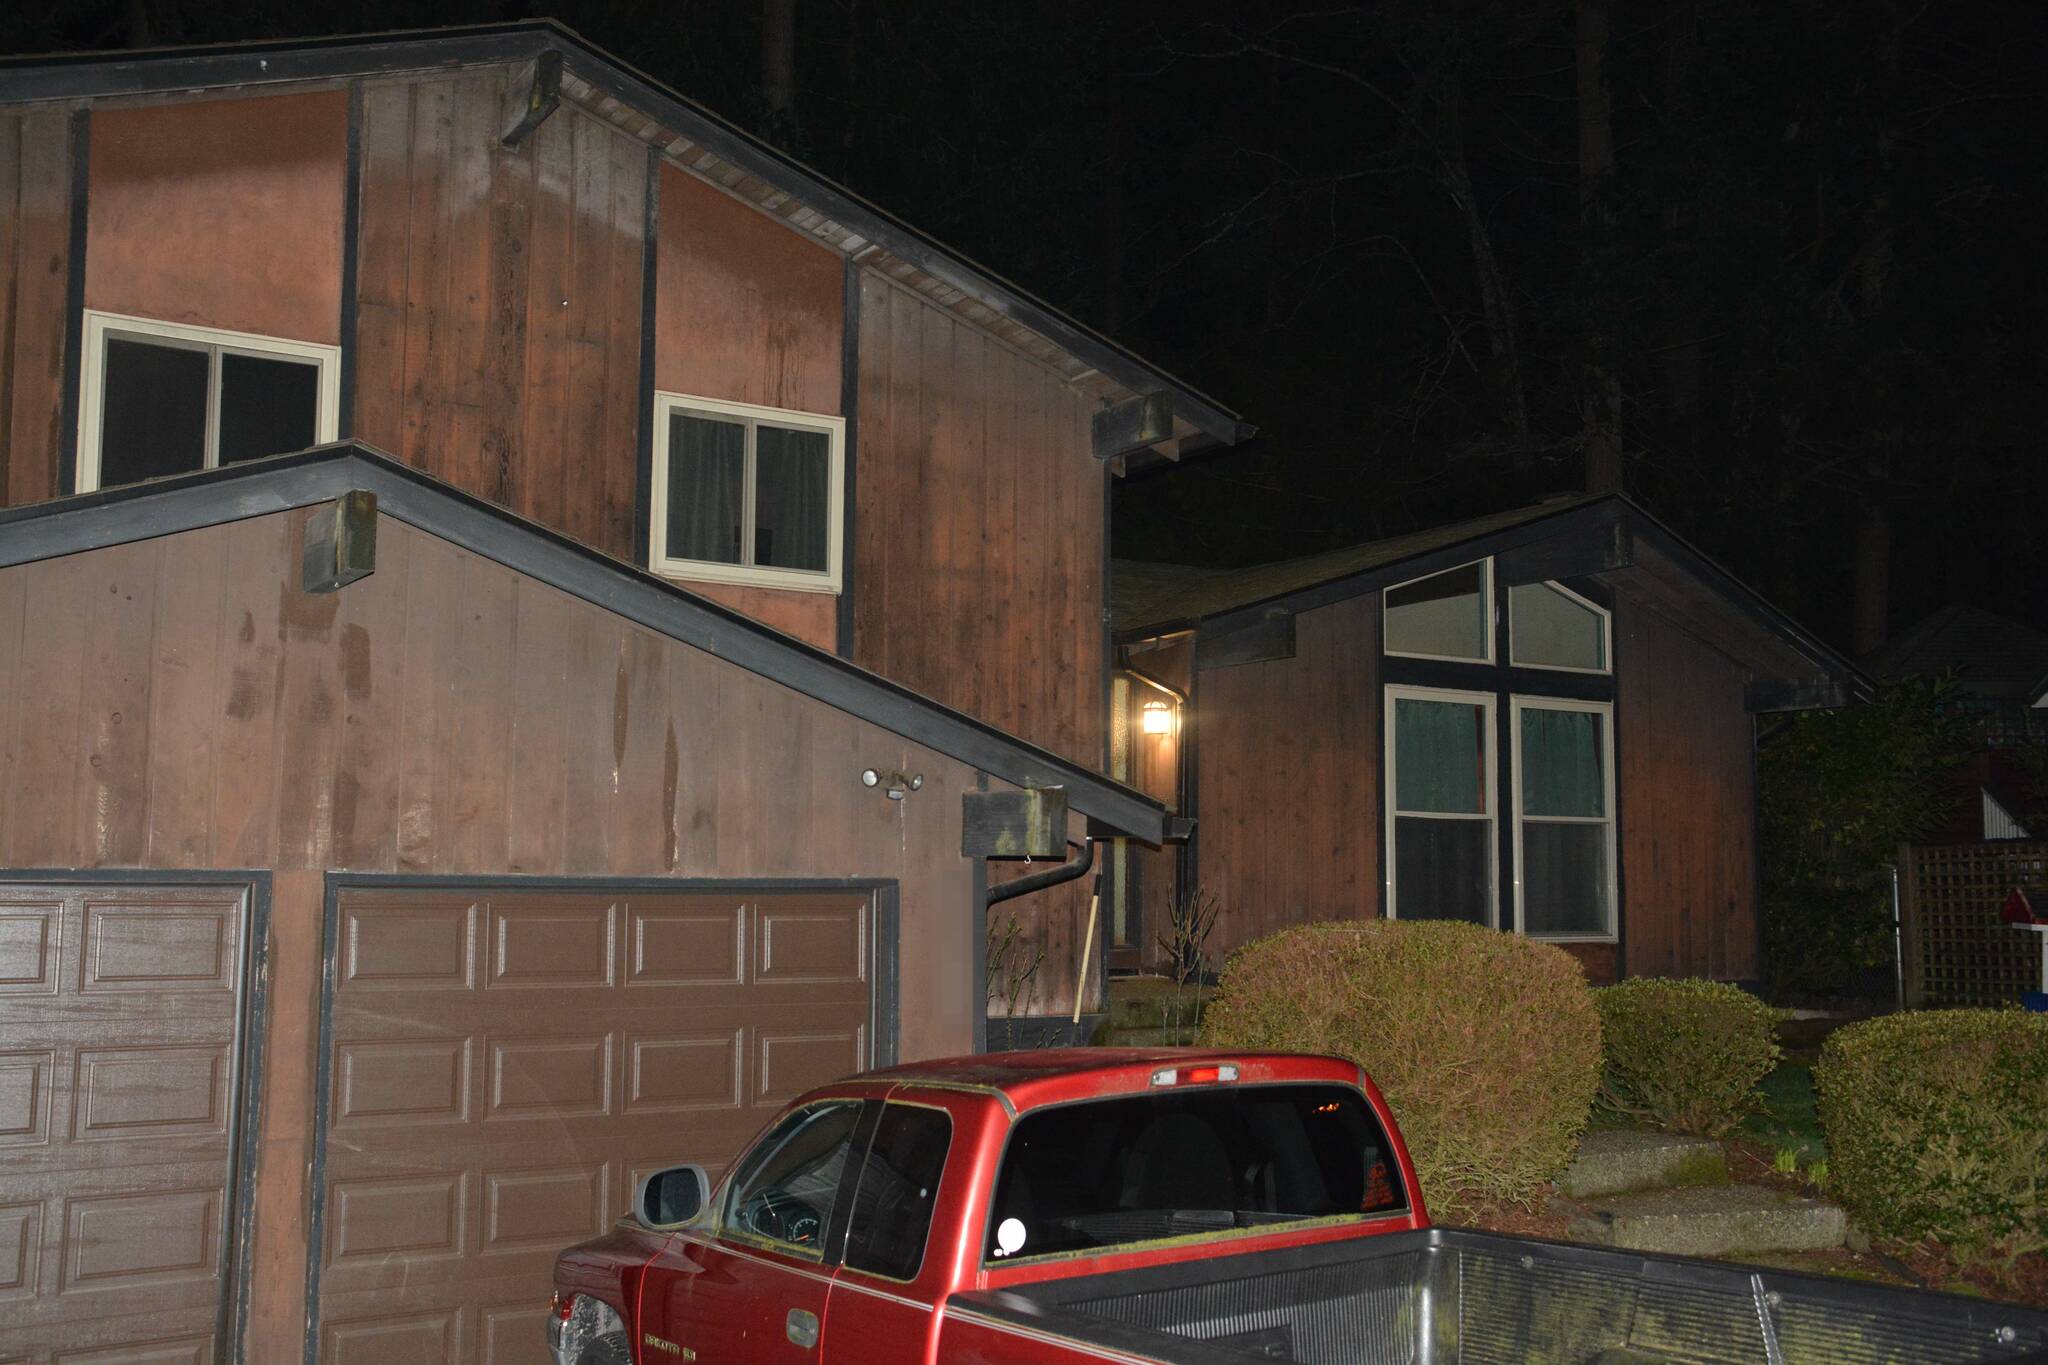 A photo of the house police responded to late March 14. Kitsap County Sheriff’s Office courtesy photo